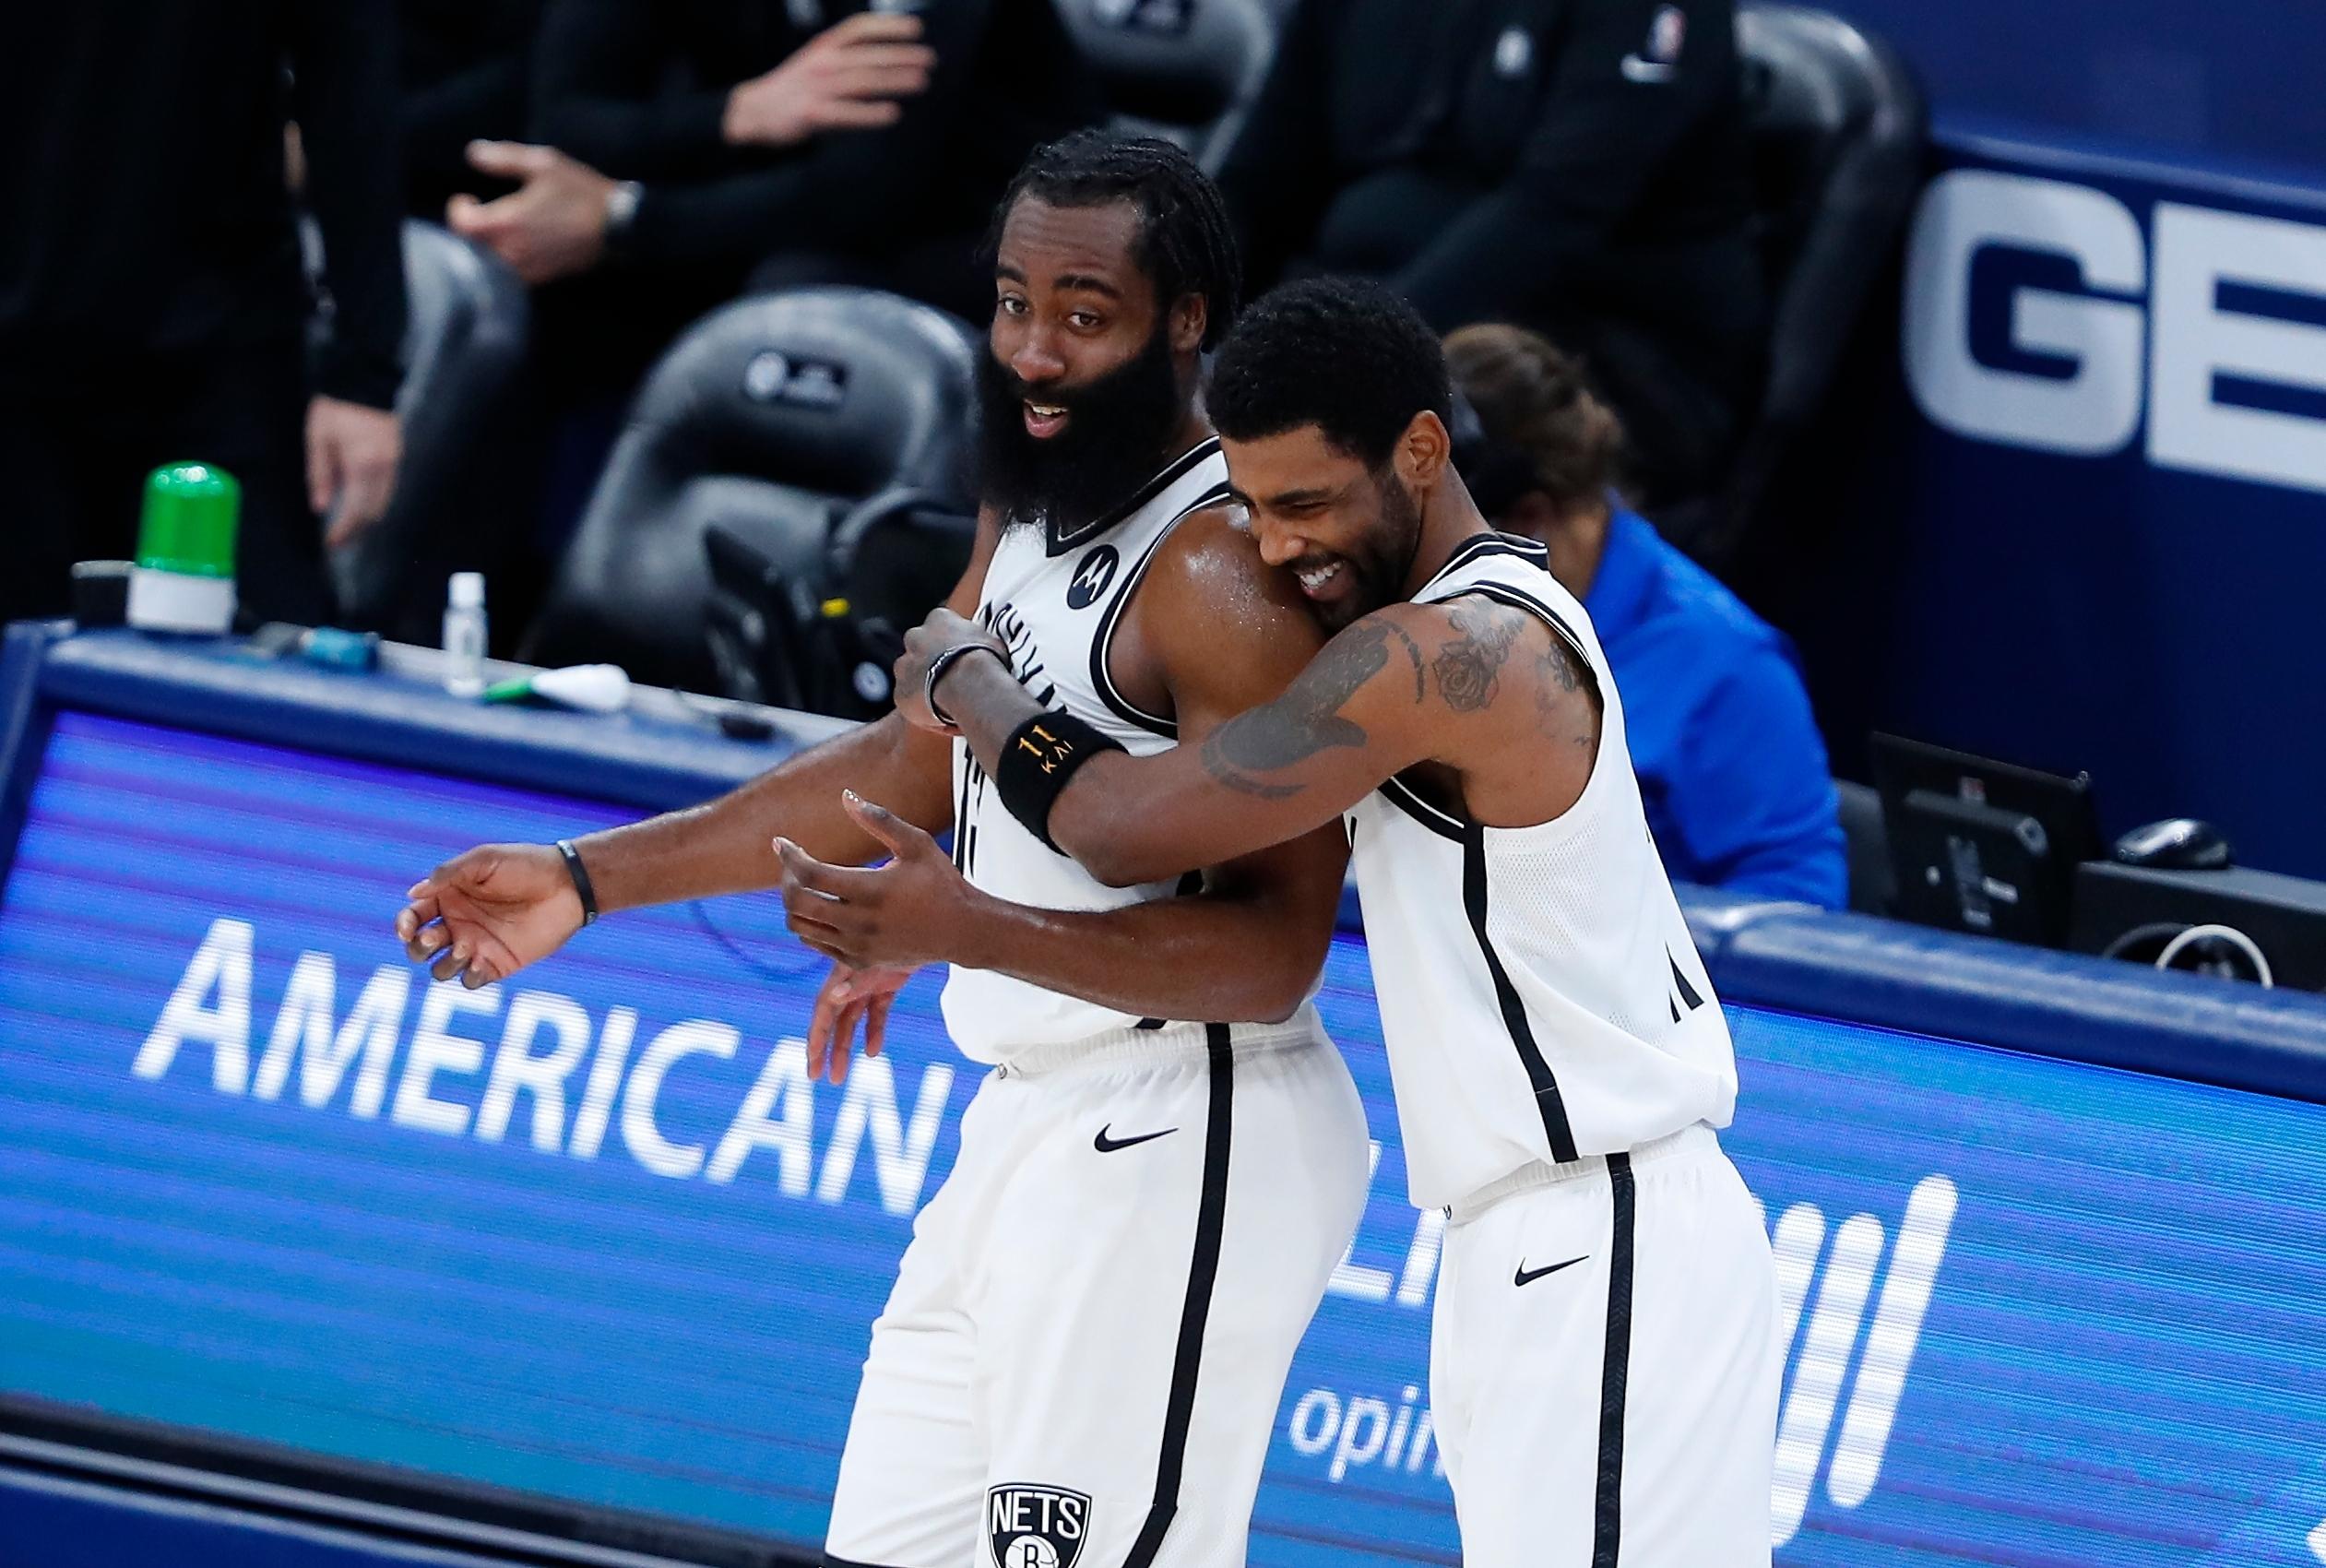 Jan 29, 2021; Oklahoma City, Oklahoma, USA; Brooklyn Nets guard James Harden (left) and guard Kyrie Irving (right) celebrate during a time out against the Oklahoma City Thunder during the second half at Chesapeake Energy Arena. Mandatory Credit: Alonzo Adams-USA TODAY Sports / Alonzo Adams-USA TODAY Sports